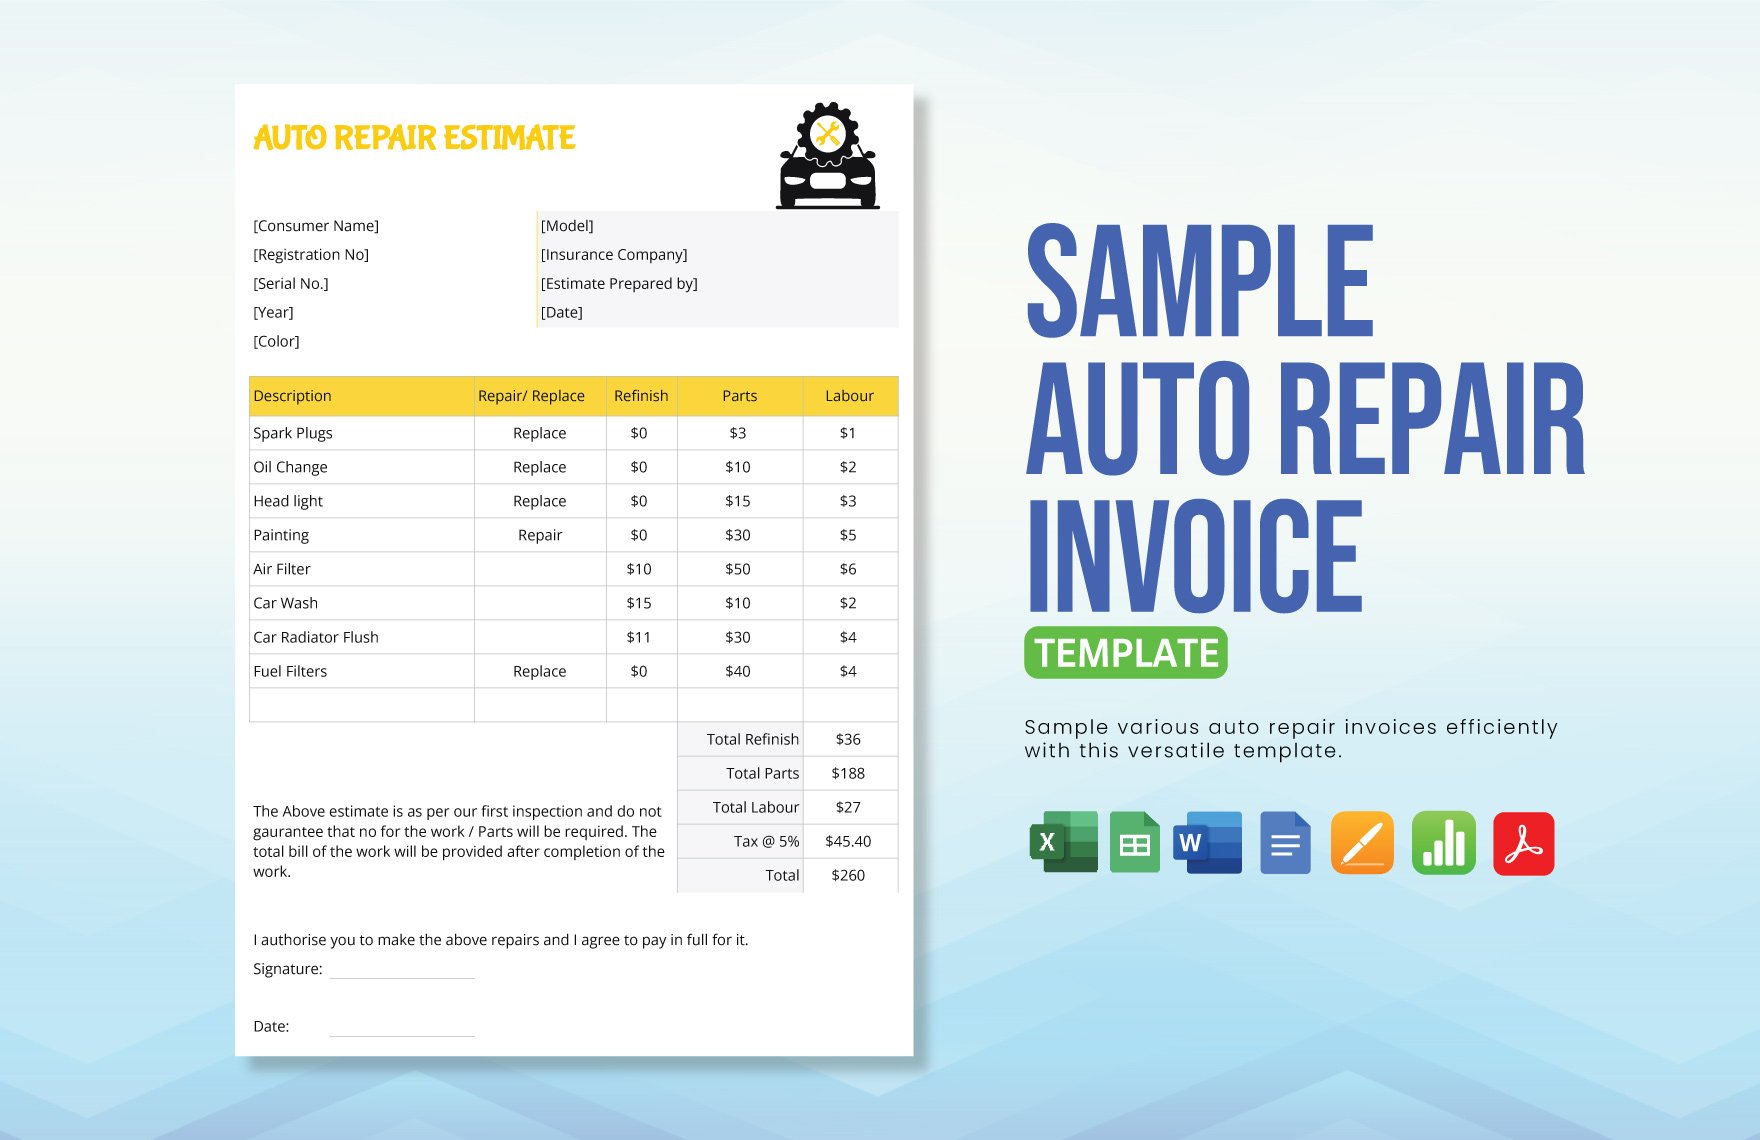 Sample Auto Repair Invoice Template in Word, Google Docs, Excel, PDF, Google Sheets, Apple Pages, Apple Numbers